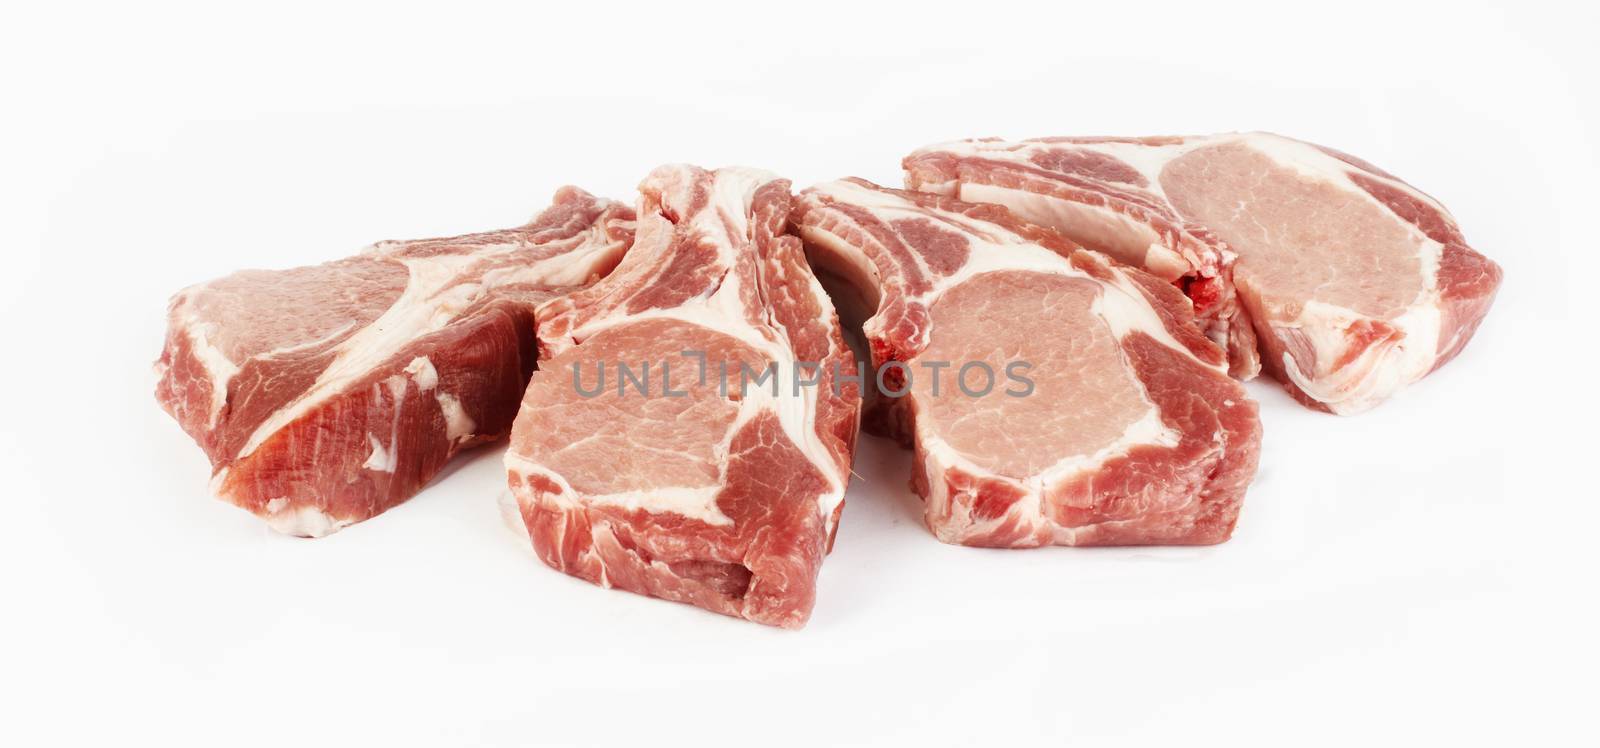 meat raw pork cutlet on a white background 